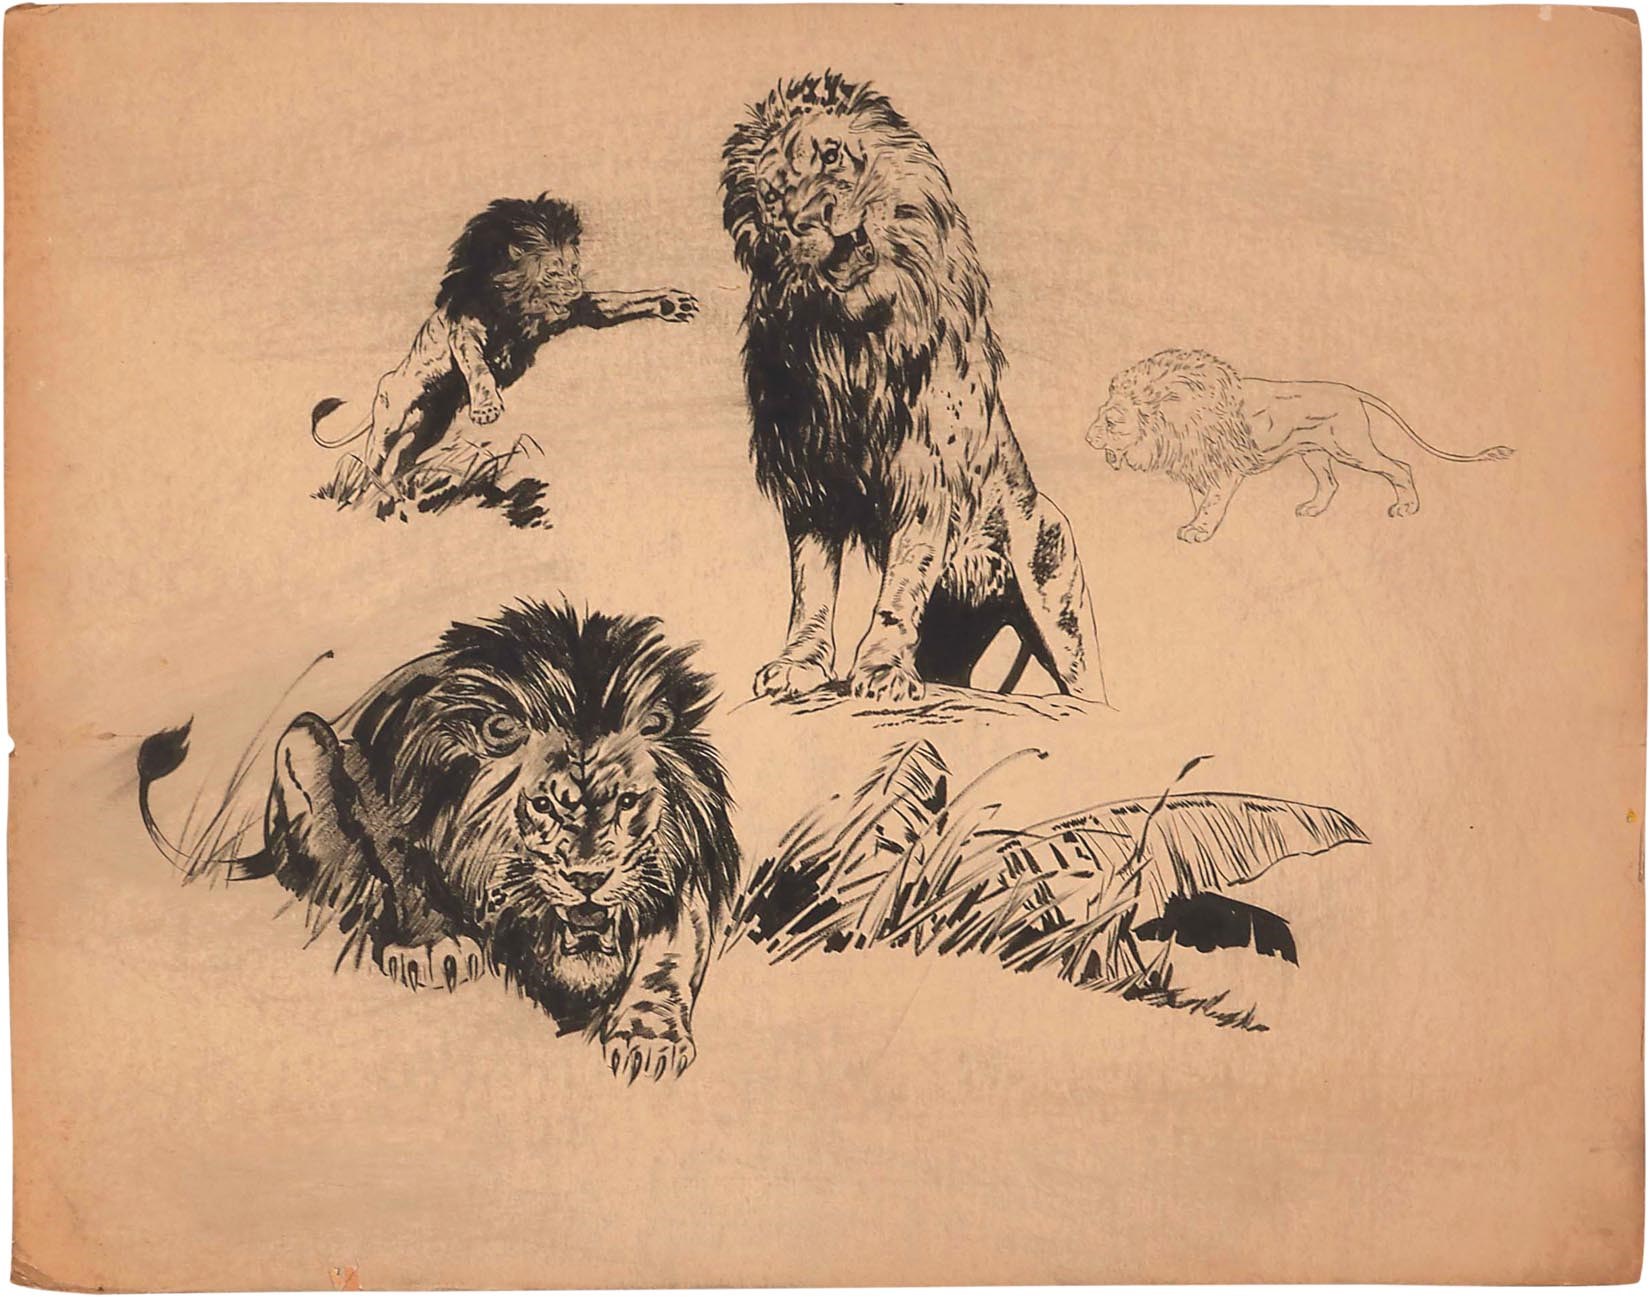 Early 1930s Tarzan "Lion" Character Study Guide by Hal Foster